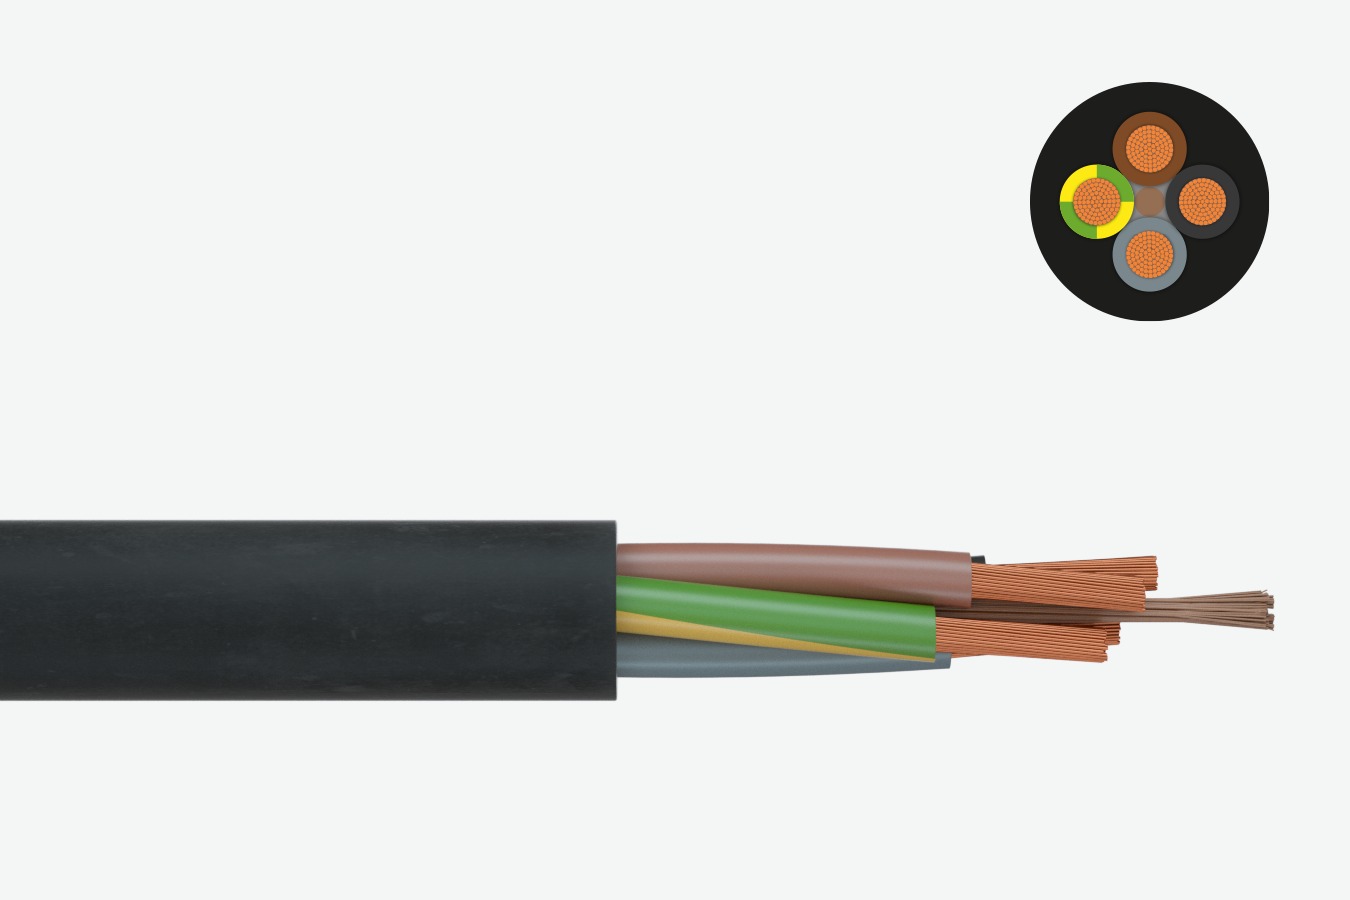 FRNC rubber cable H07ZZ-F